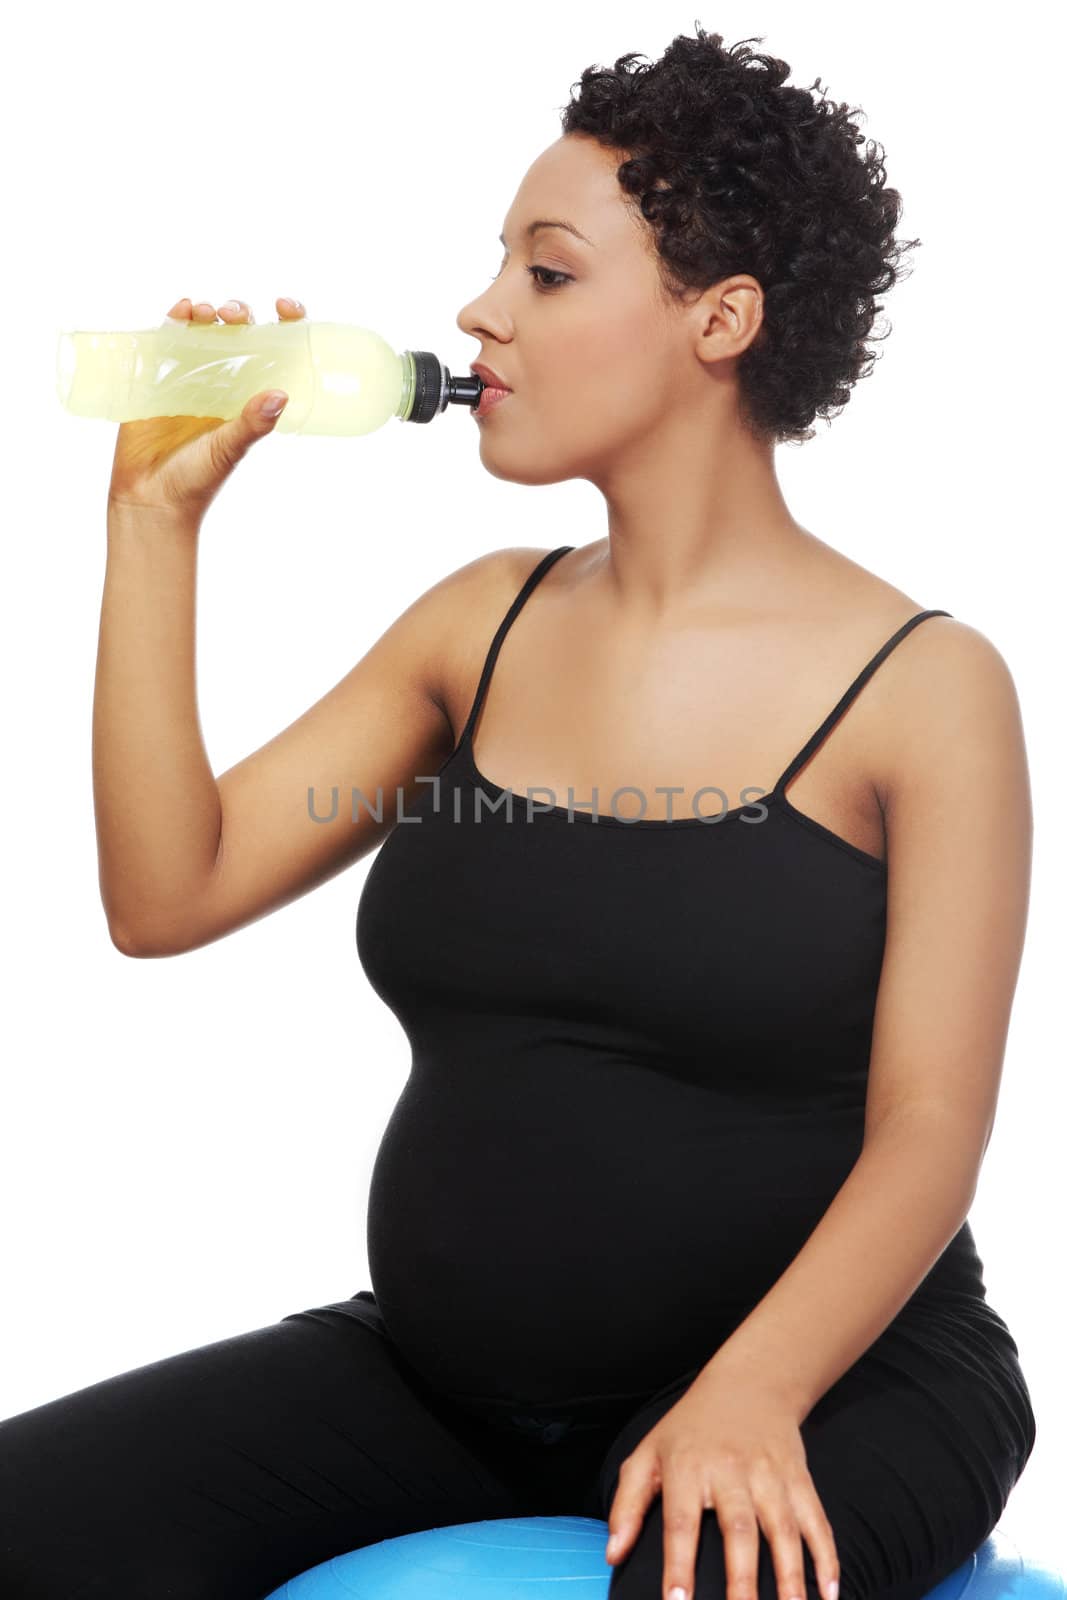 Pregnant woman during exercising. by BDS